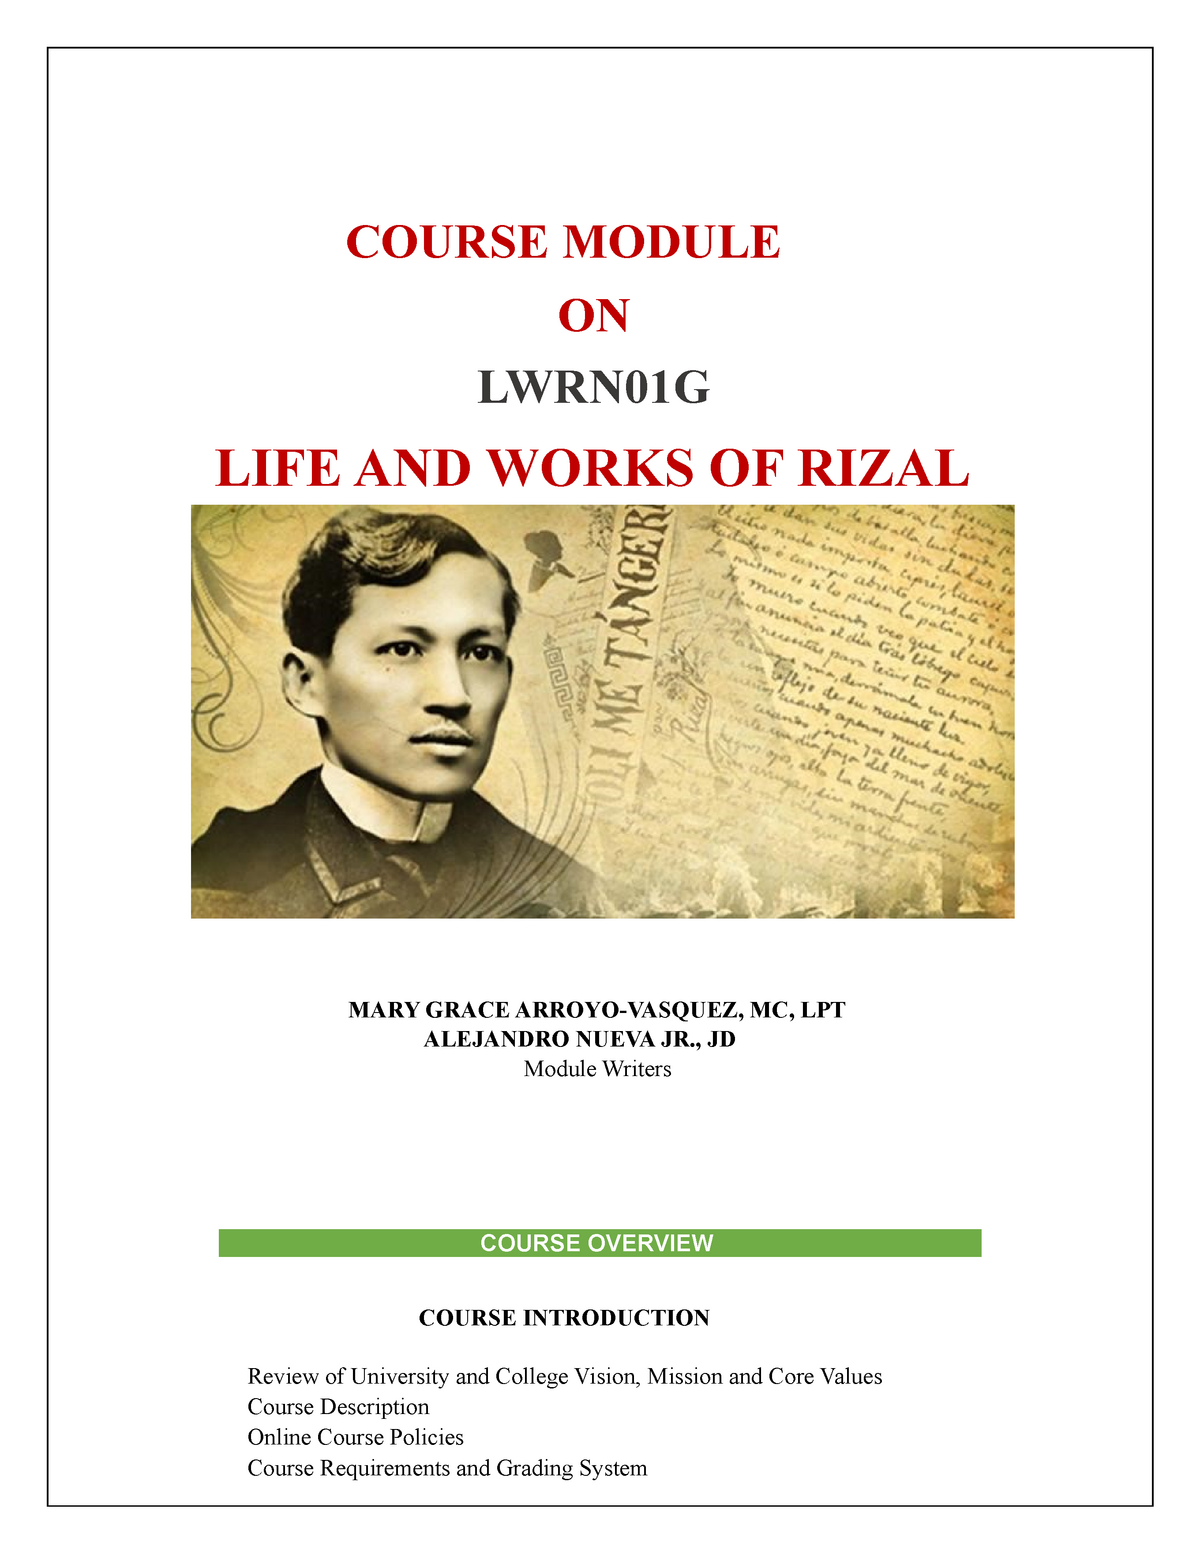 essay about rizal's life works and writings